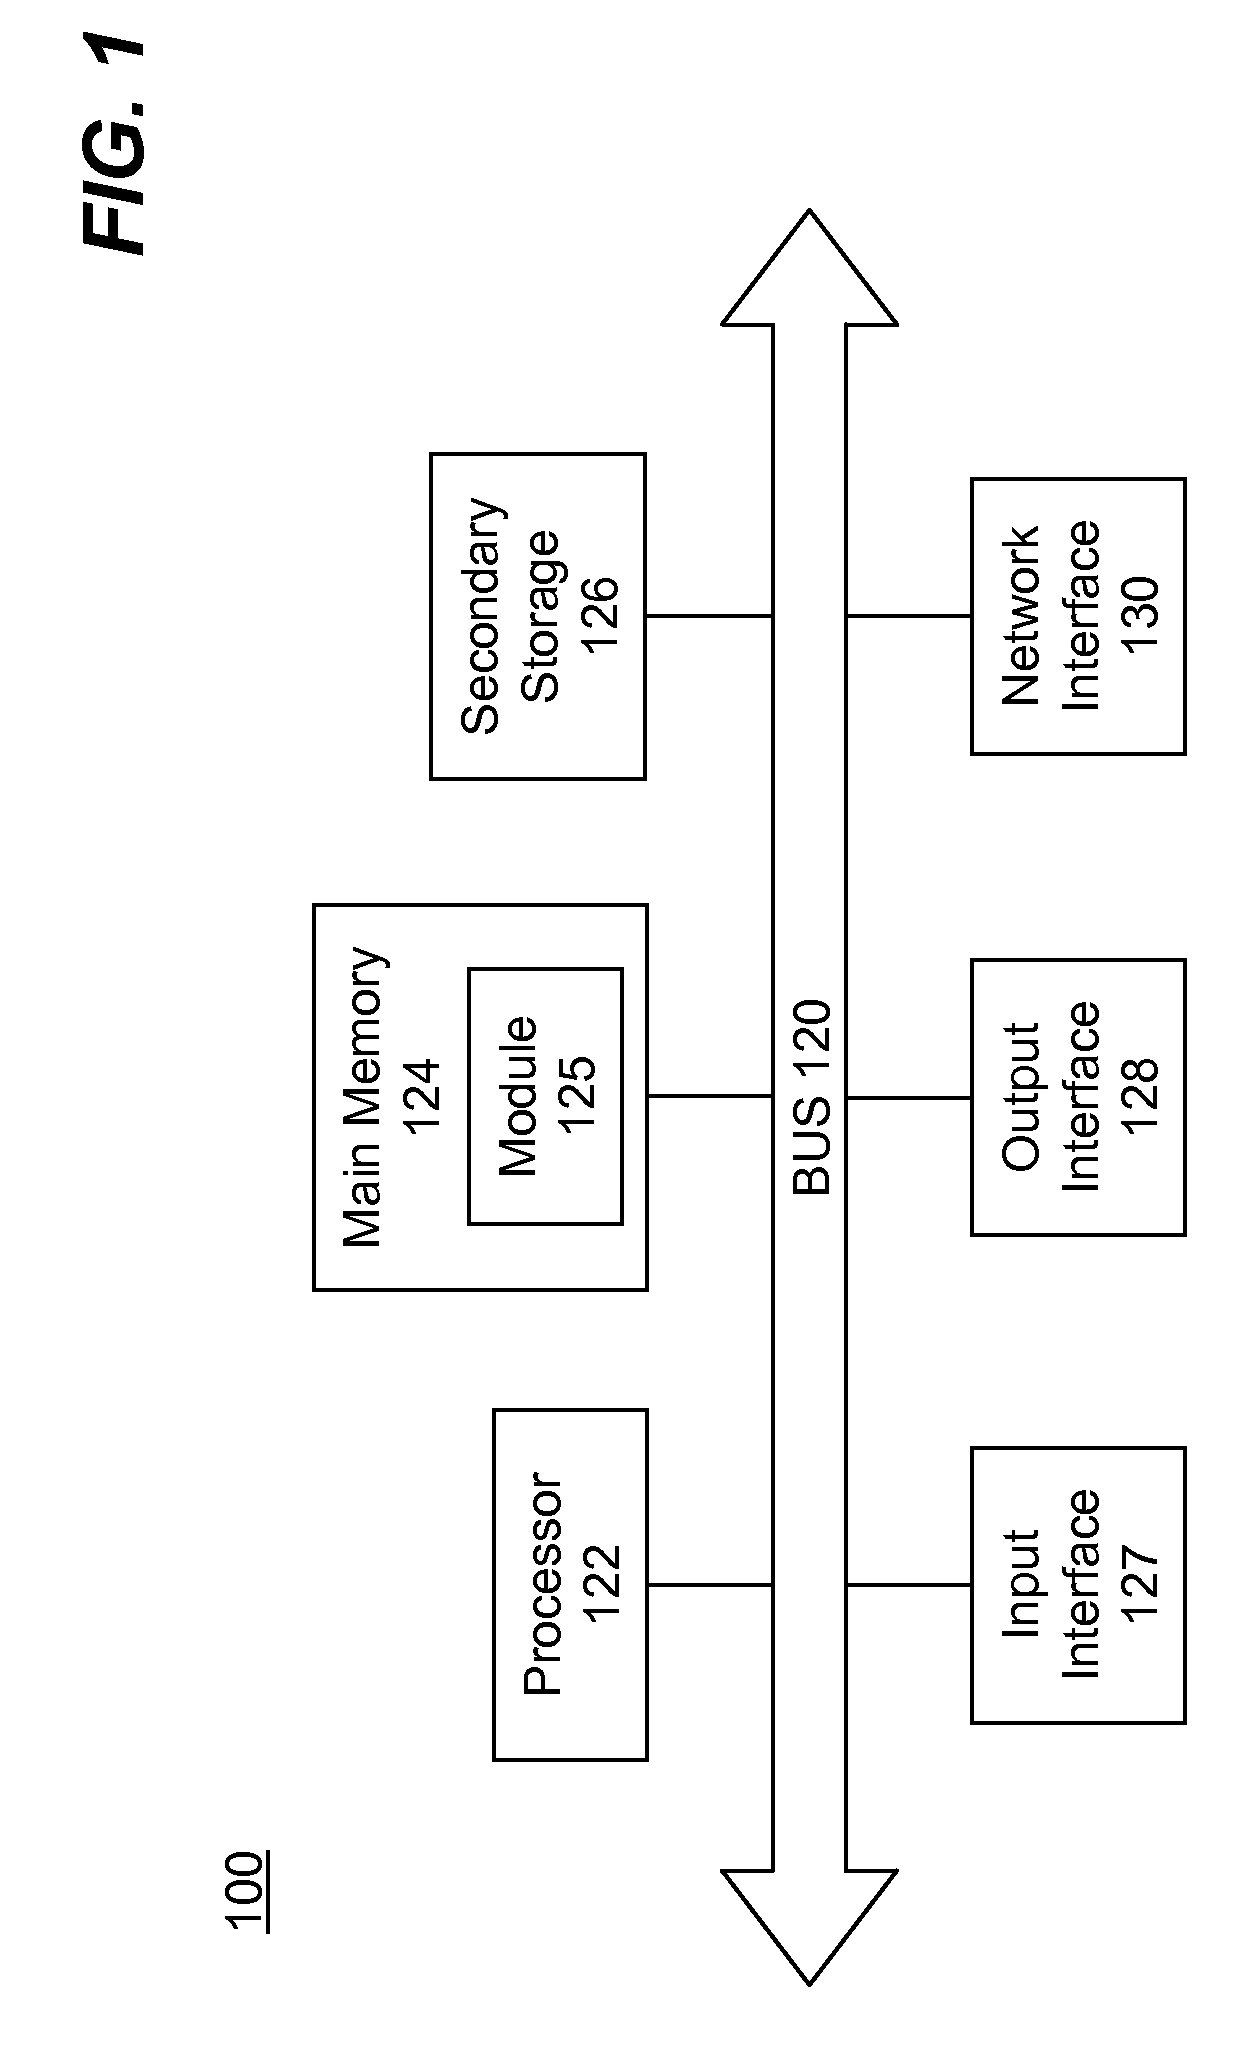 Hybrid SSD Using A Combination of SLC and MLC Flash Memory Arrays